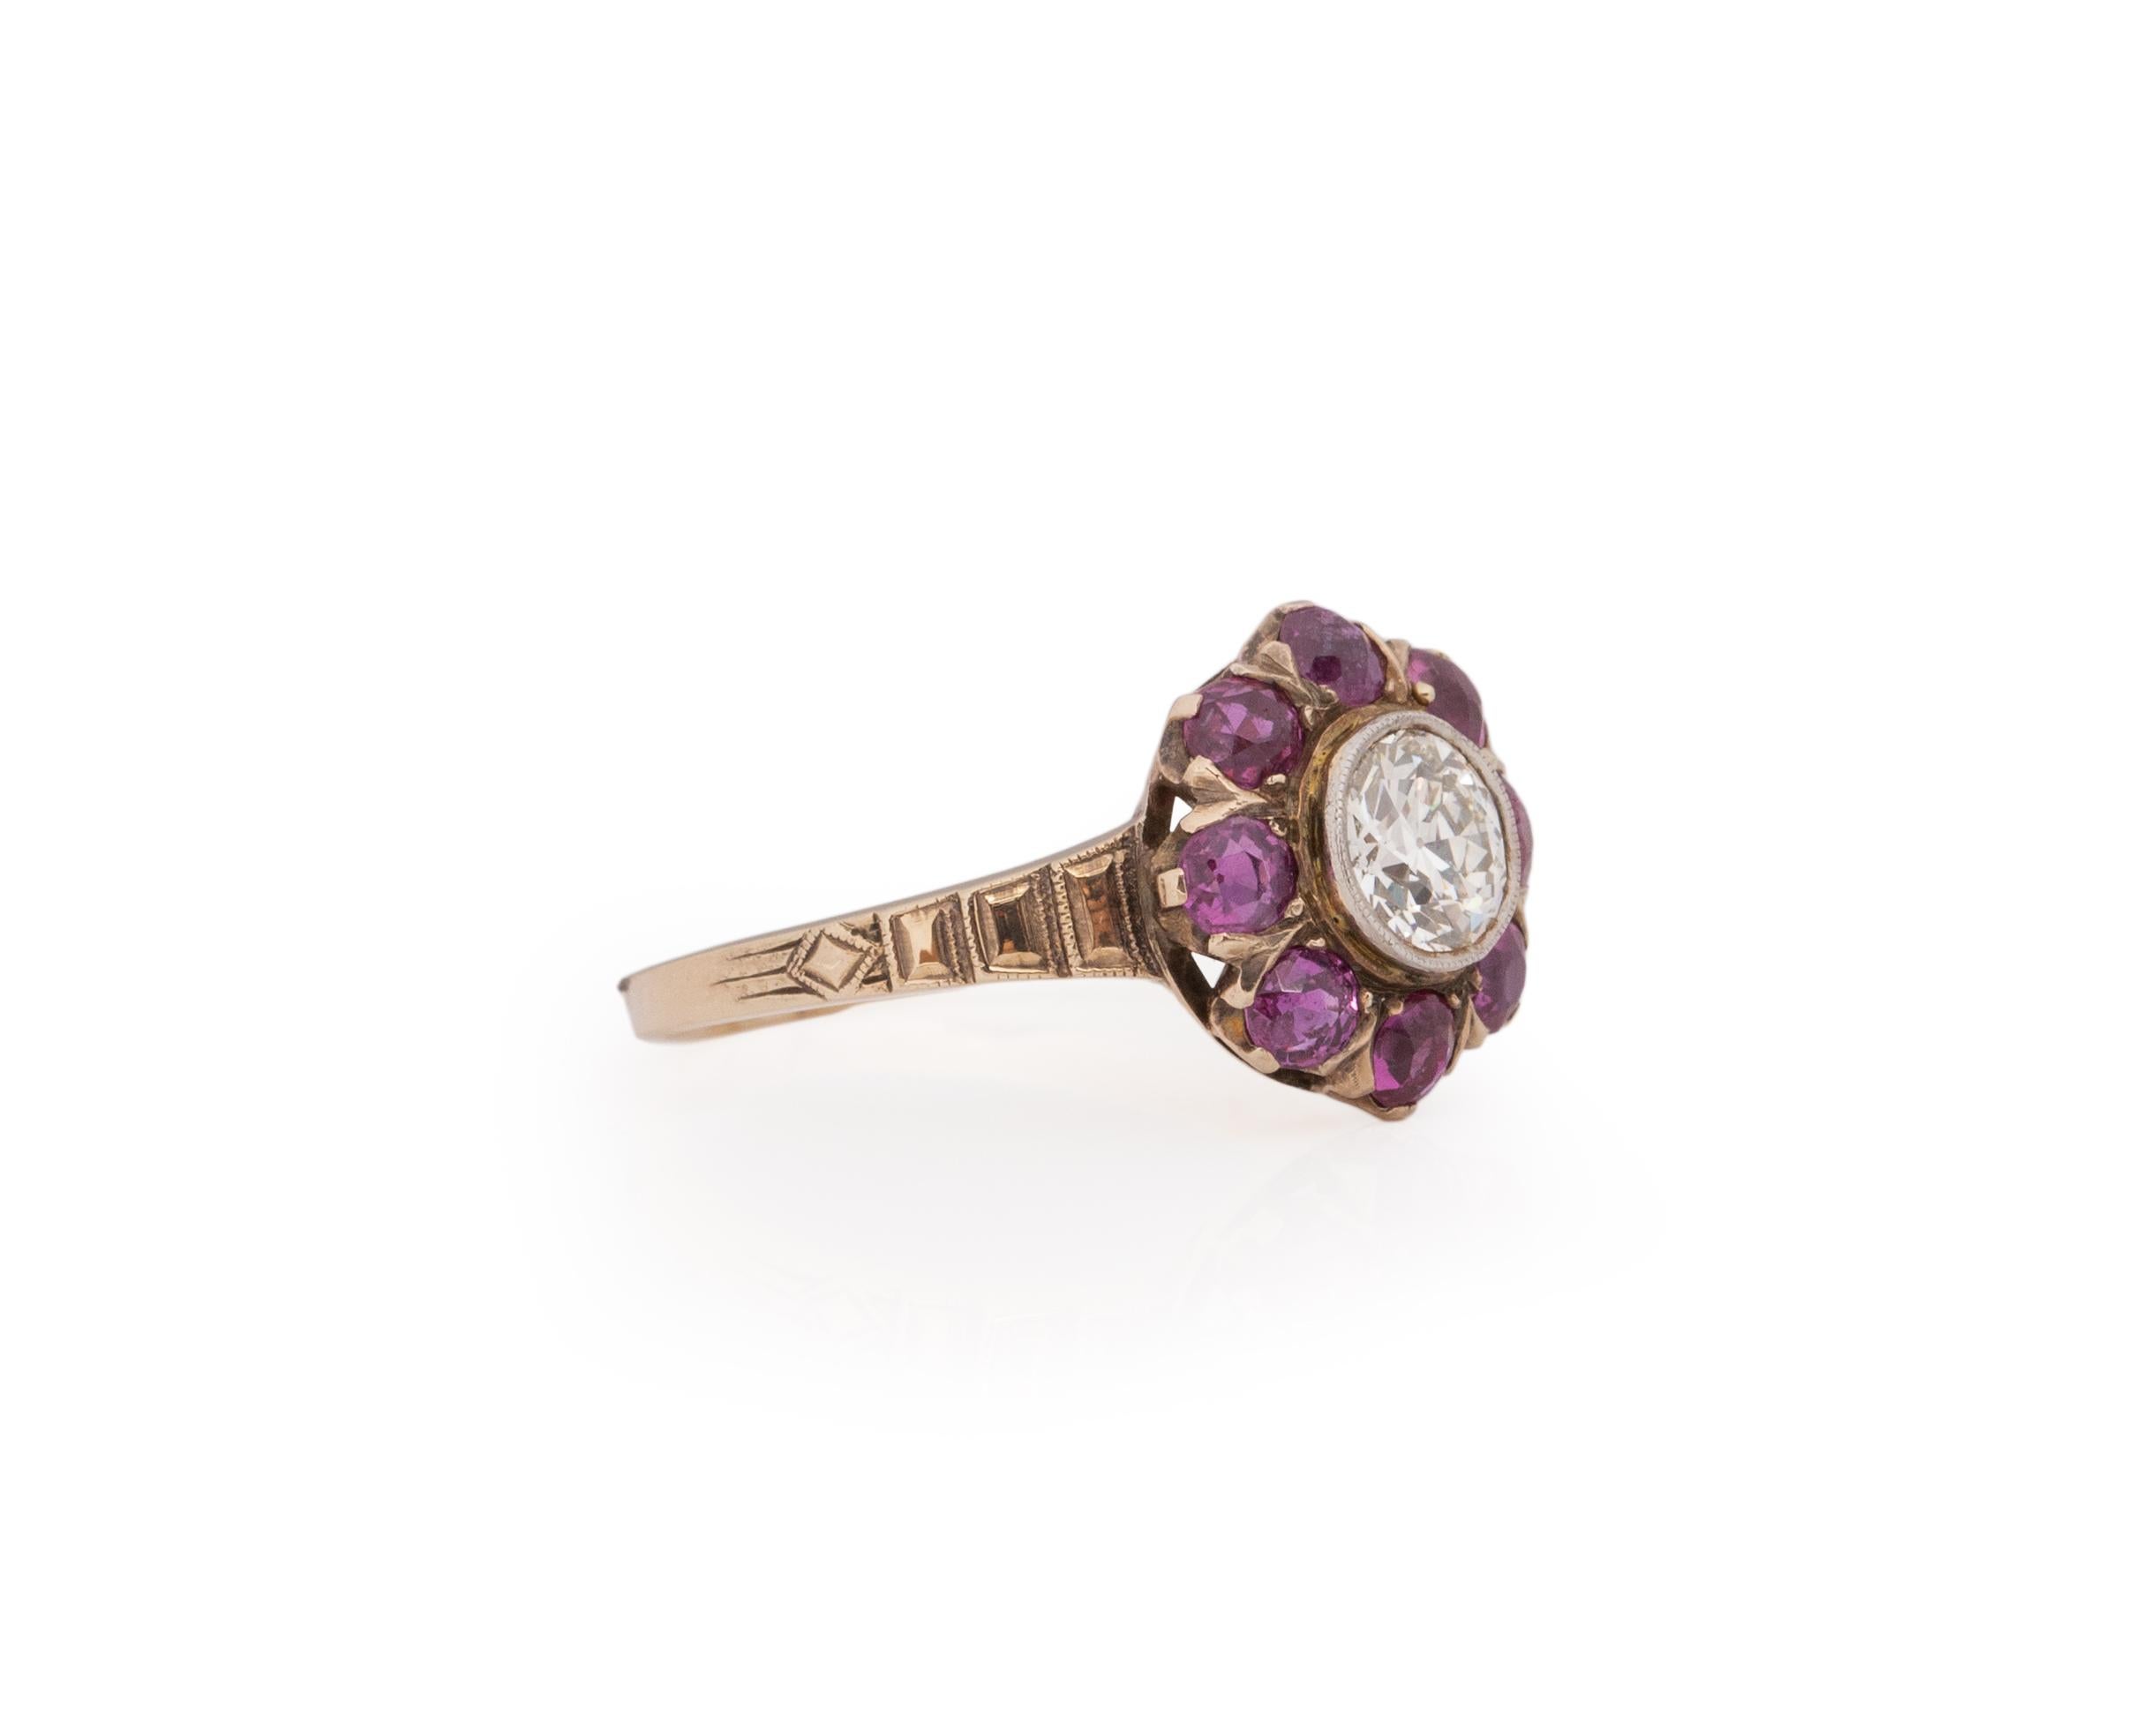 Ring Size: 7.25
Metal Type: 14K Yellow Gold [Hallmarked, and Tested]
Weight: 3.2 grams

Diamond Details:
Weight: .75ct
Cut: Old European brilliant
Color: J
Clarity: VS

Sapphire Details:
Natural, Unheated, Pink (Intense), 1.25ct total